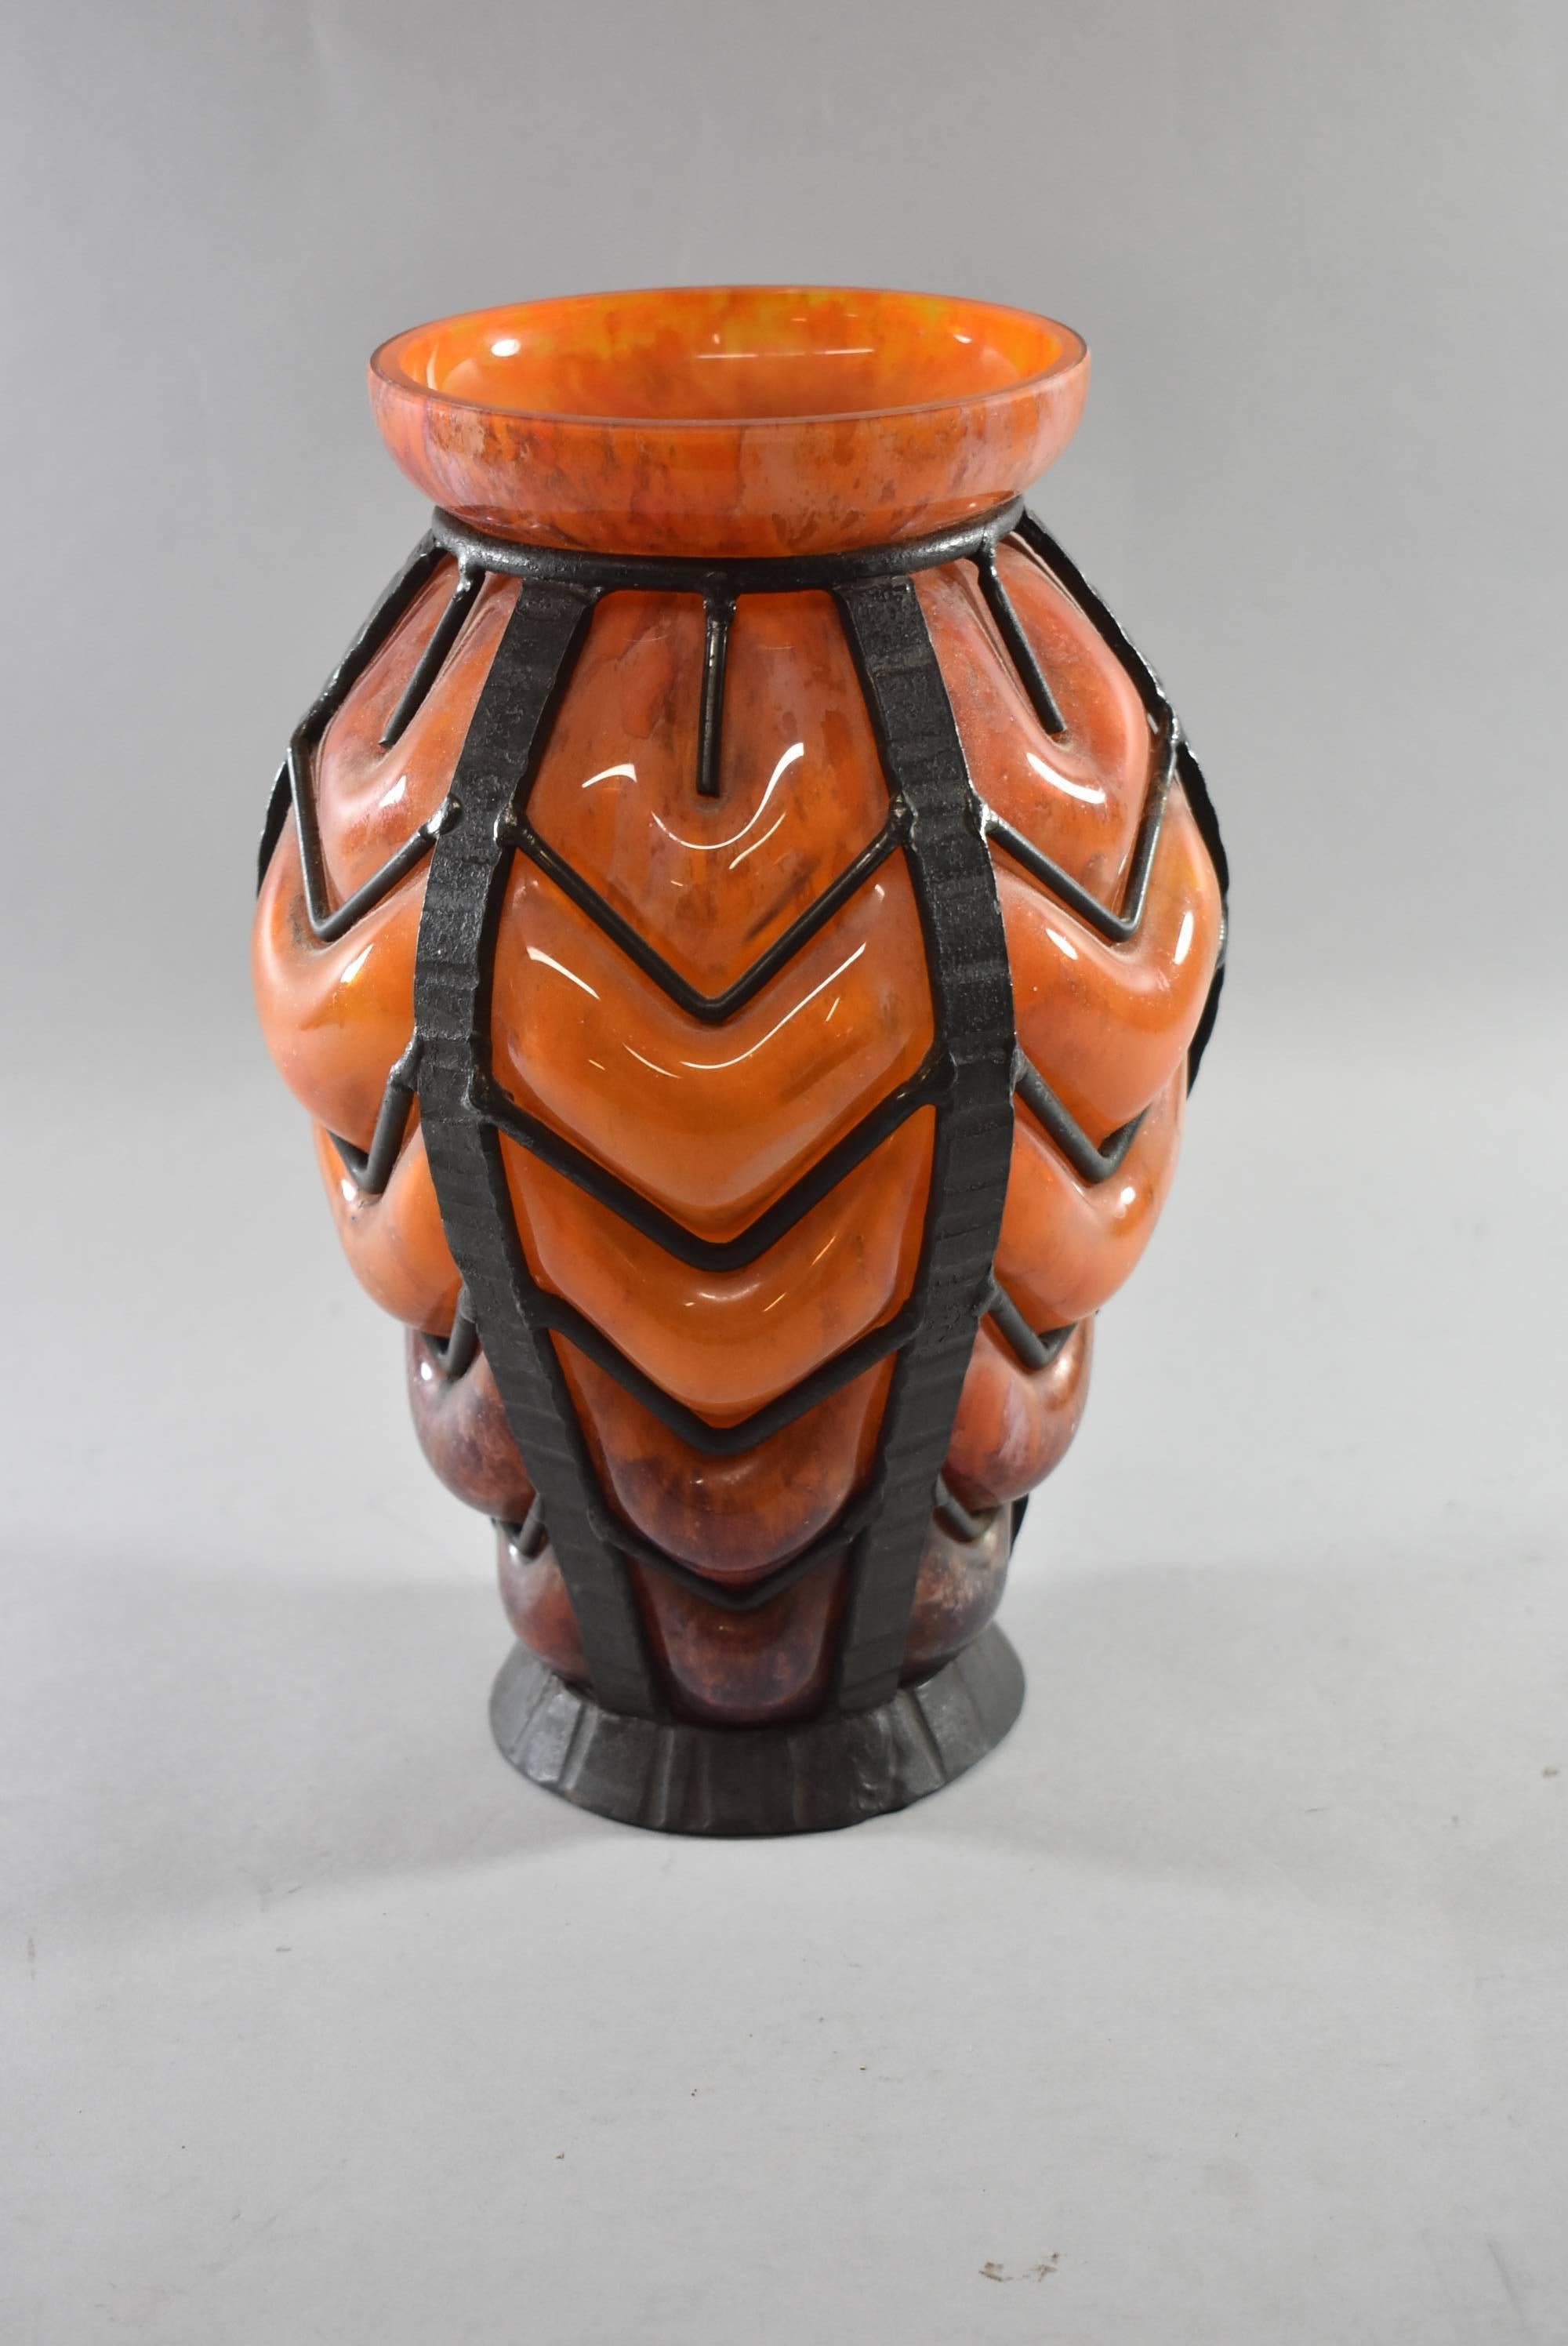 A beautiful Art Deco French art glass vase. This stunning vase features a blown glass vase encased with a hand fashioned iron frame in variegated shades of orange. Likely from the Daum factory. Great condition, no damage. Dimensions: 6.5